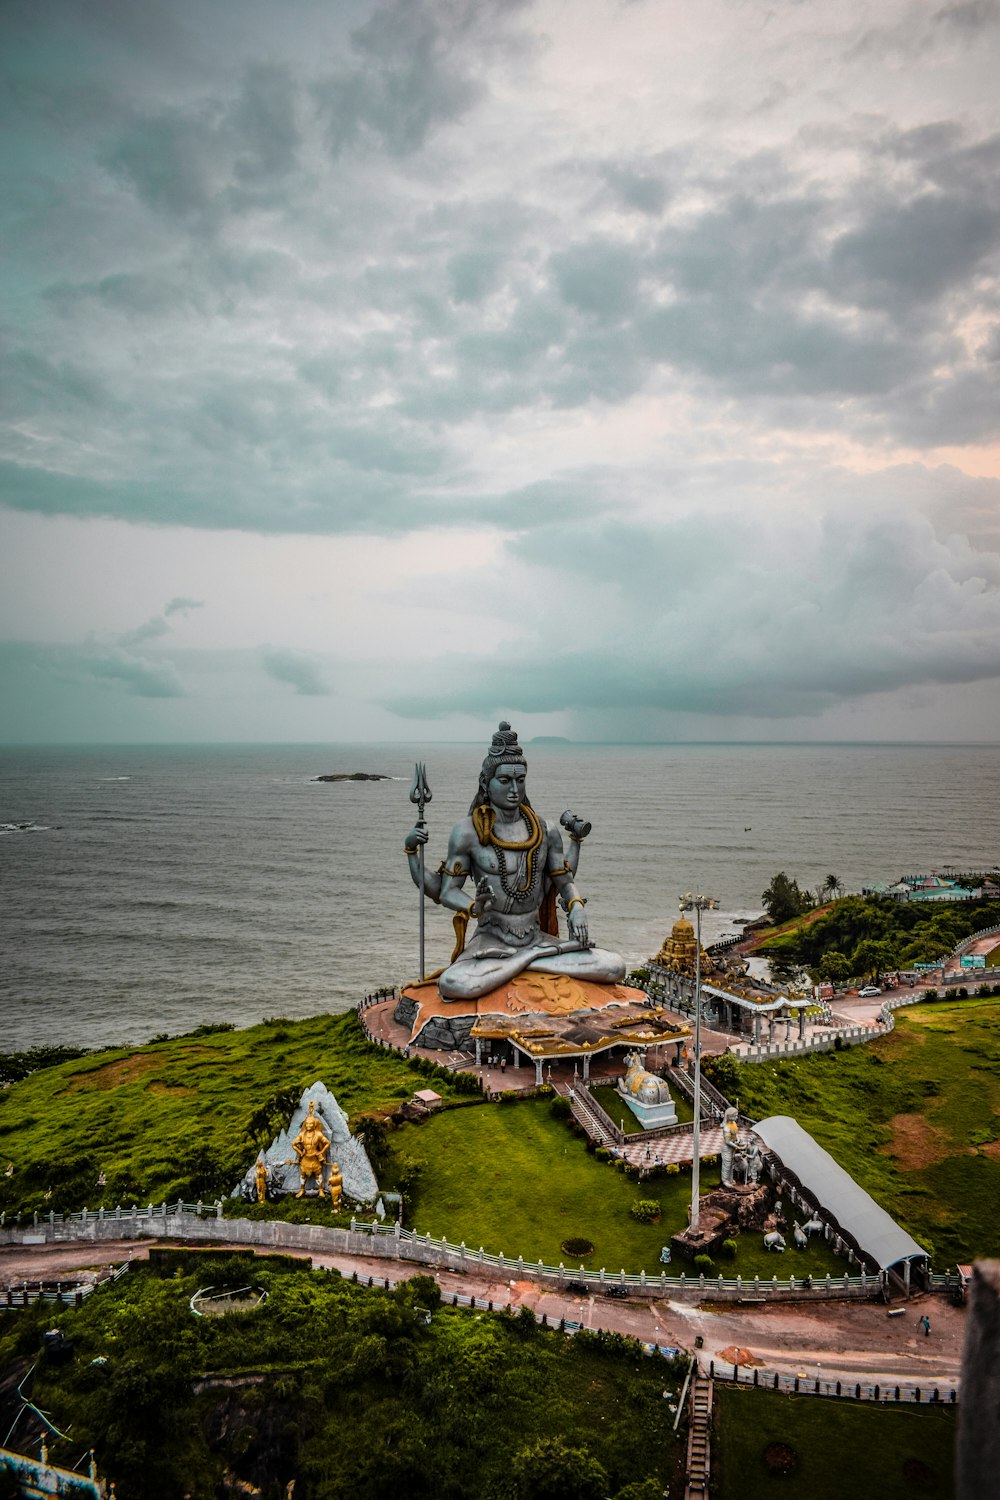 500+ Shiva Pictures [HD] | Download Free Images on Unsplash